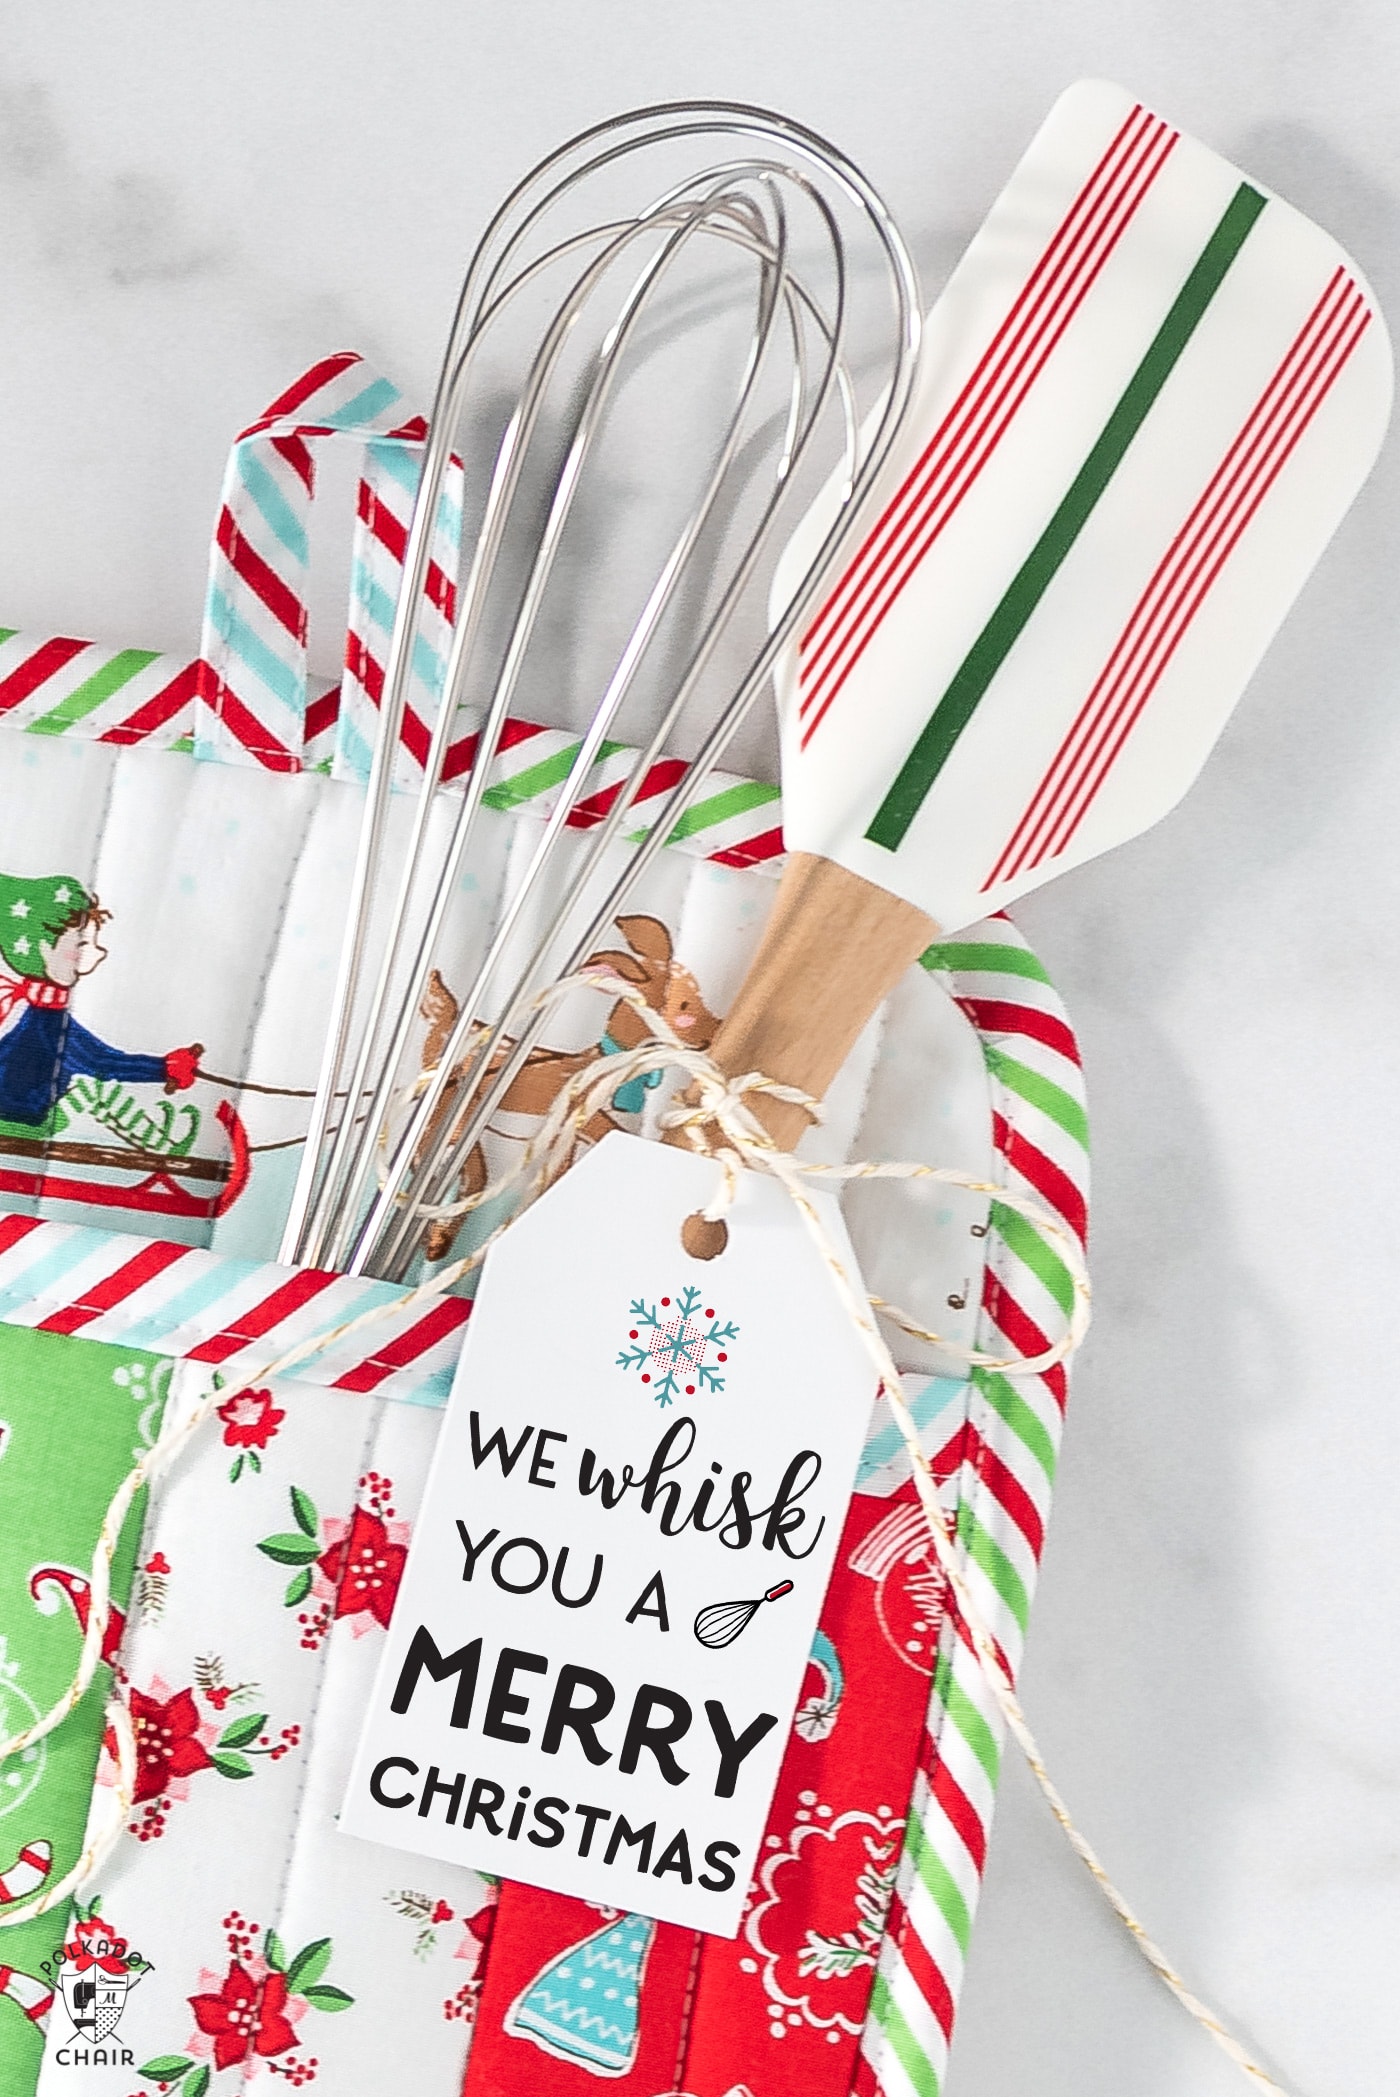 Neighbor Gift Idea: Christmas Soaps with Free Printable - Keeping it Simple